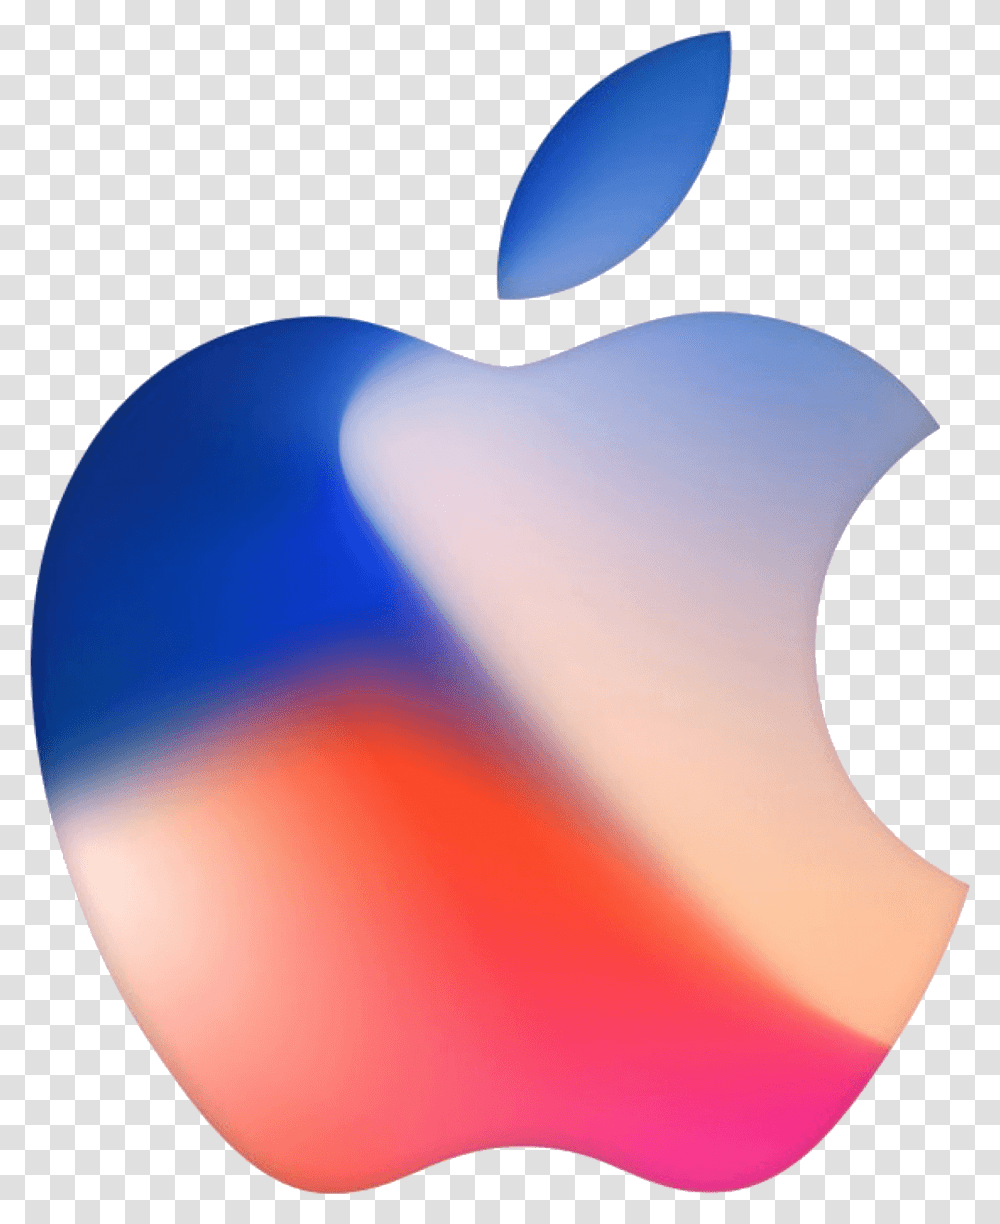 Apple Logo Apple Iphone X Logo, Balloon, Heart, Moon, Outer Space Transparent Png